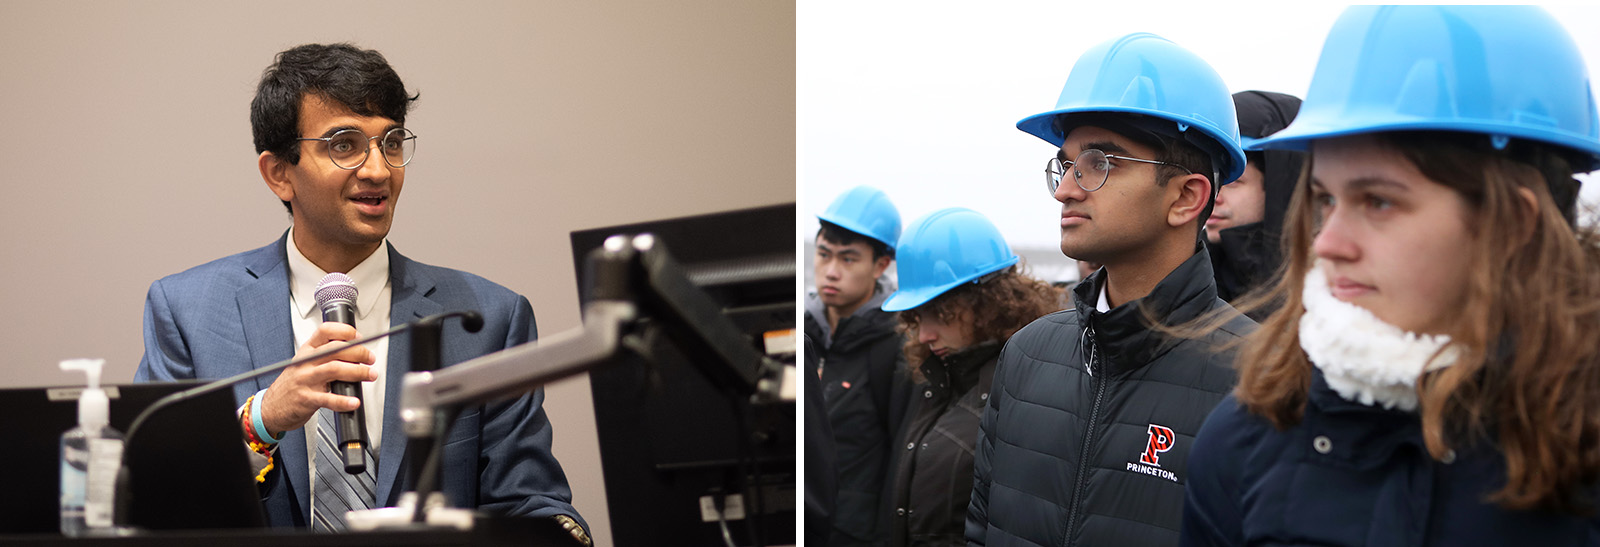 Two image photo: Left a man in a suit speaks behind a podium,and right, the same man seen outdoors wearing a hardhat with others.